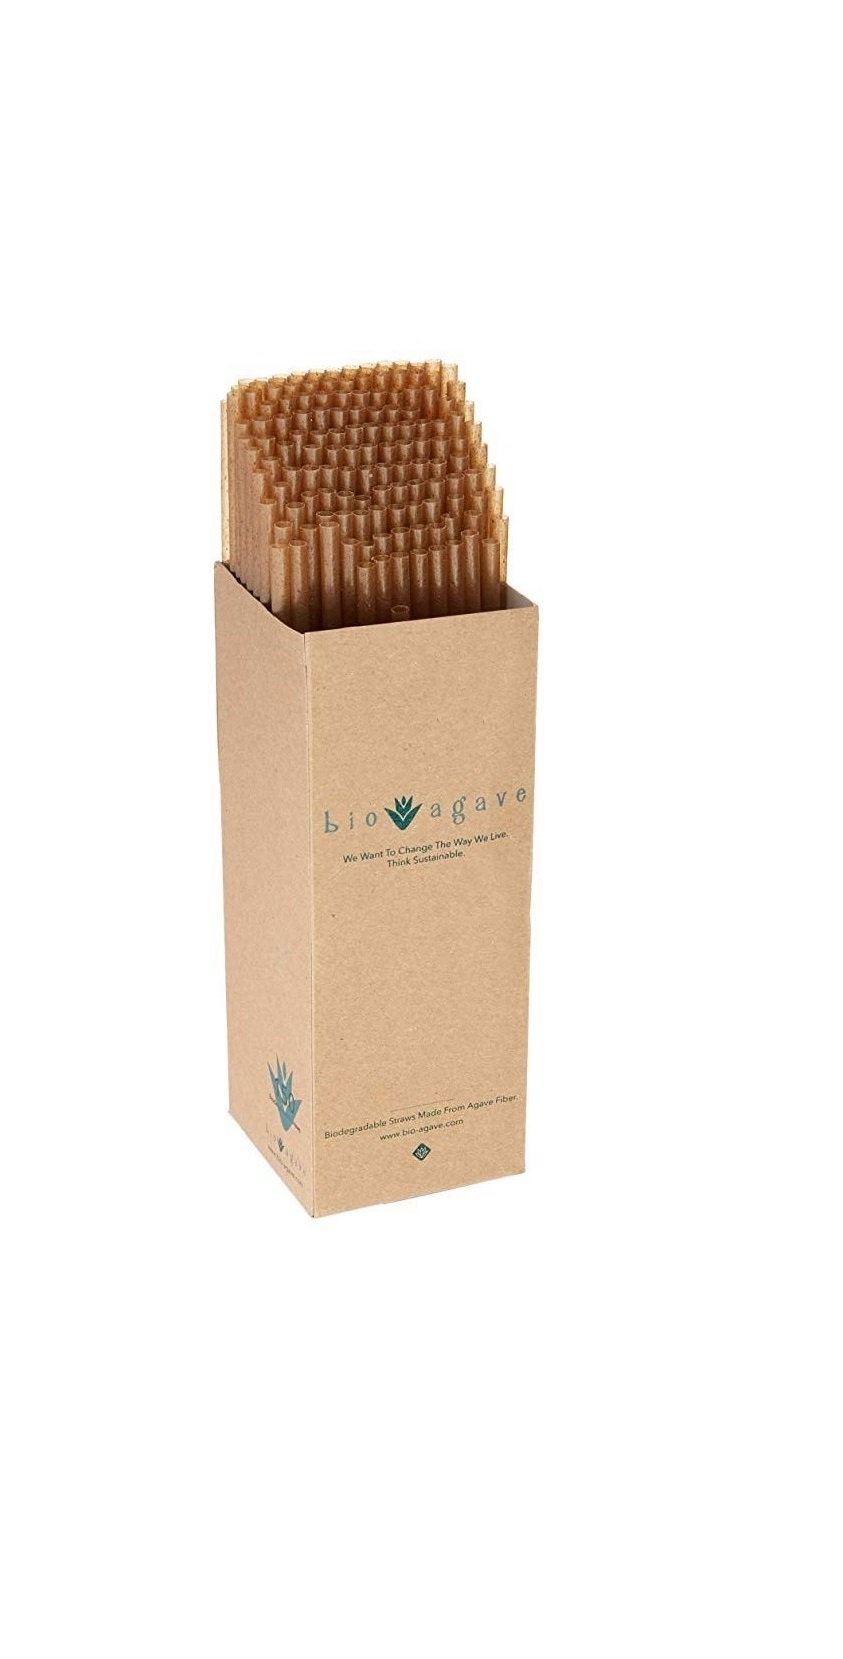 150 Biodegradable Straws Made From Agave Fibers